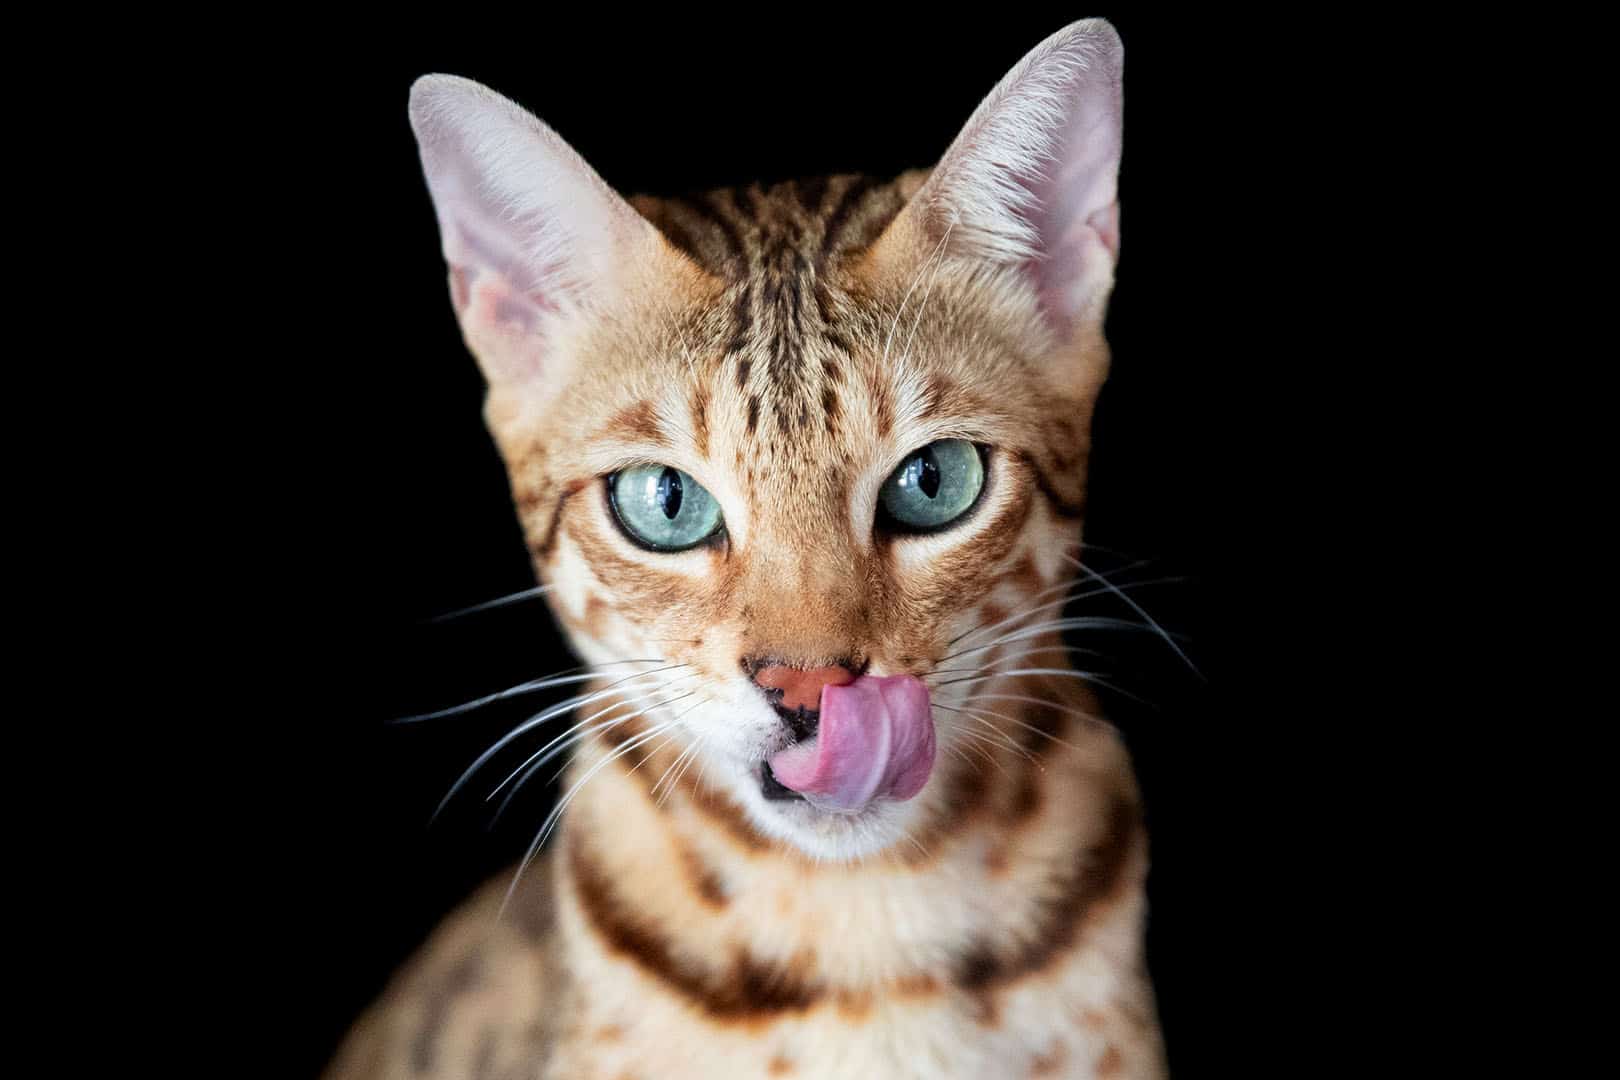 How to Feed a Bengal Cat